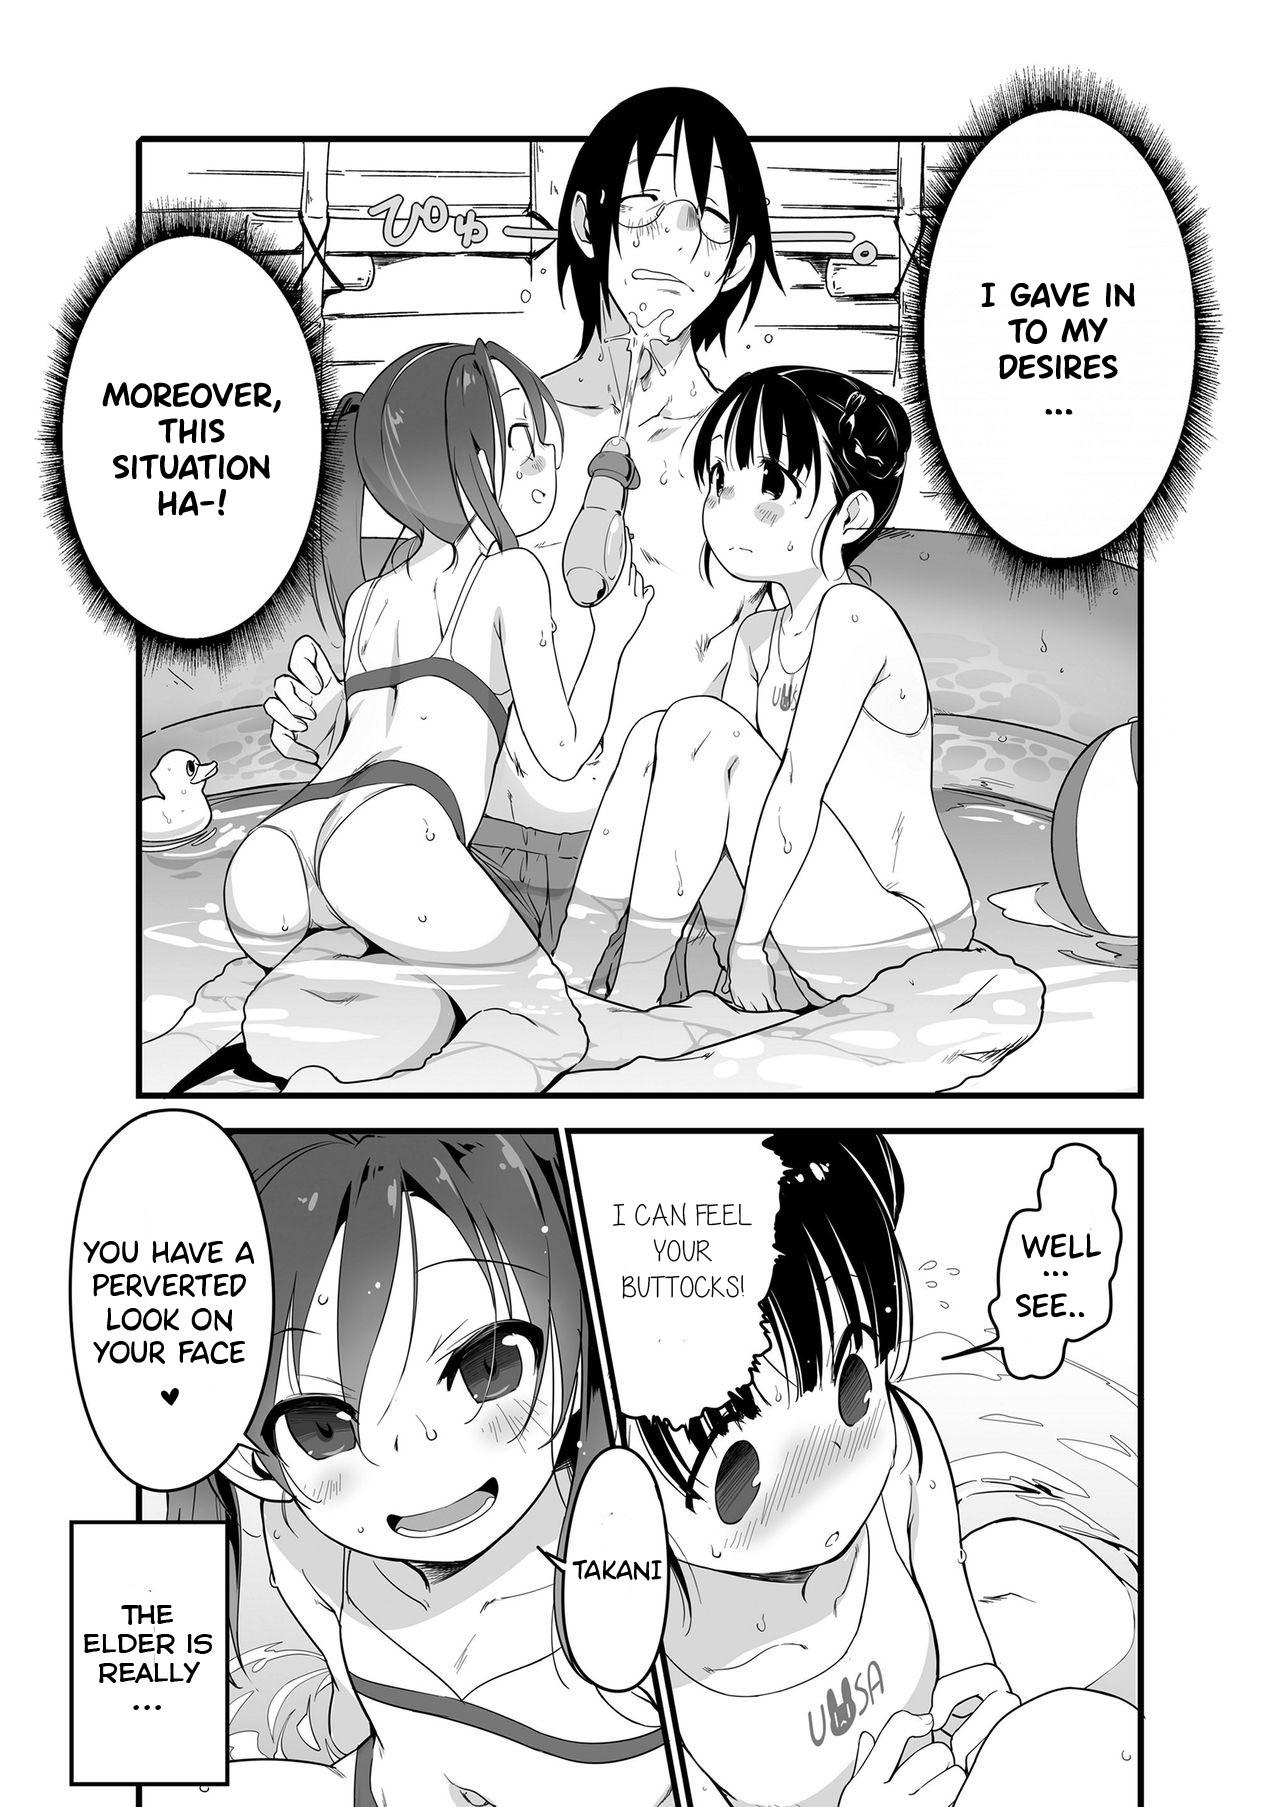 Webcamsex Uchiage Hanabi, Ane to Miruka? Imouto to Miruka? | Fireworks, Should we see it with the elder sister or the younger sister? Whooty - Page 6